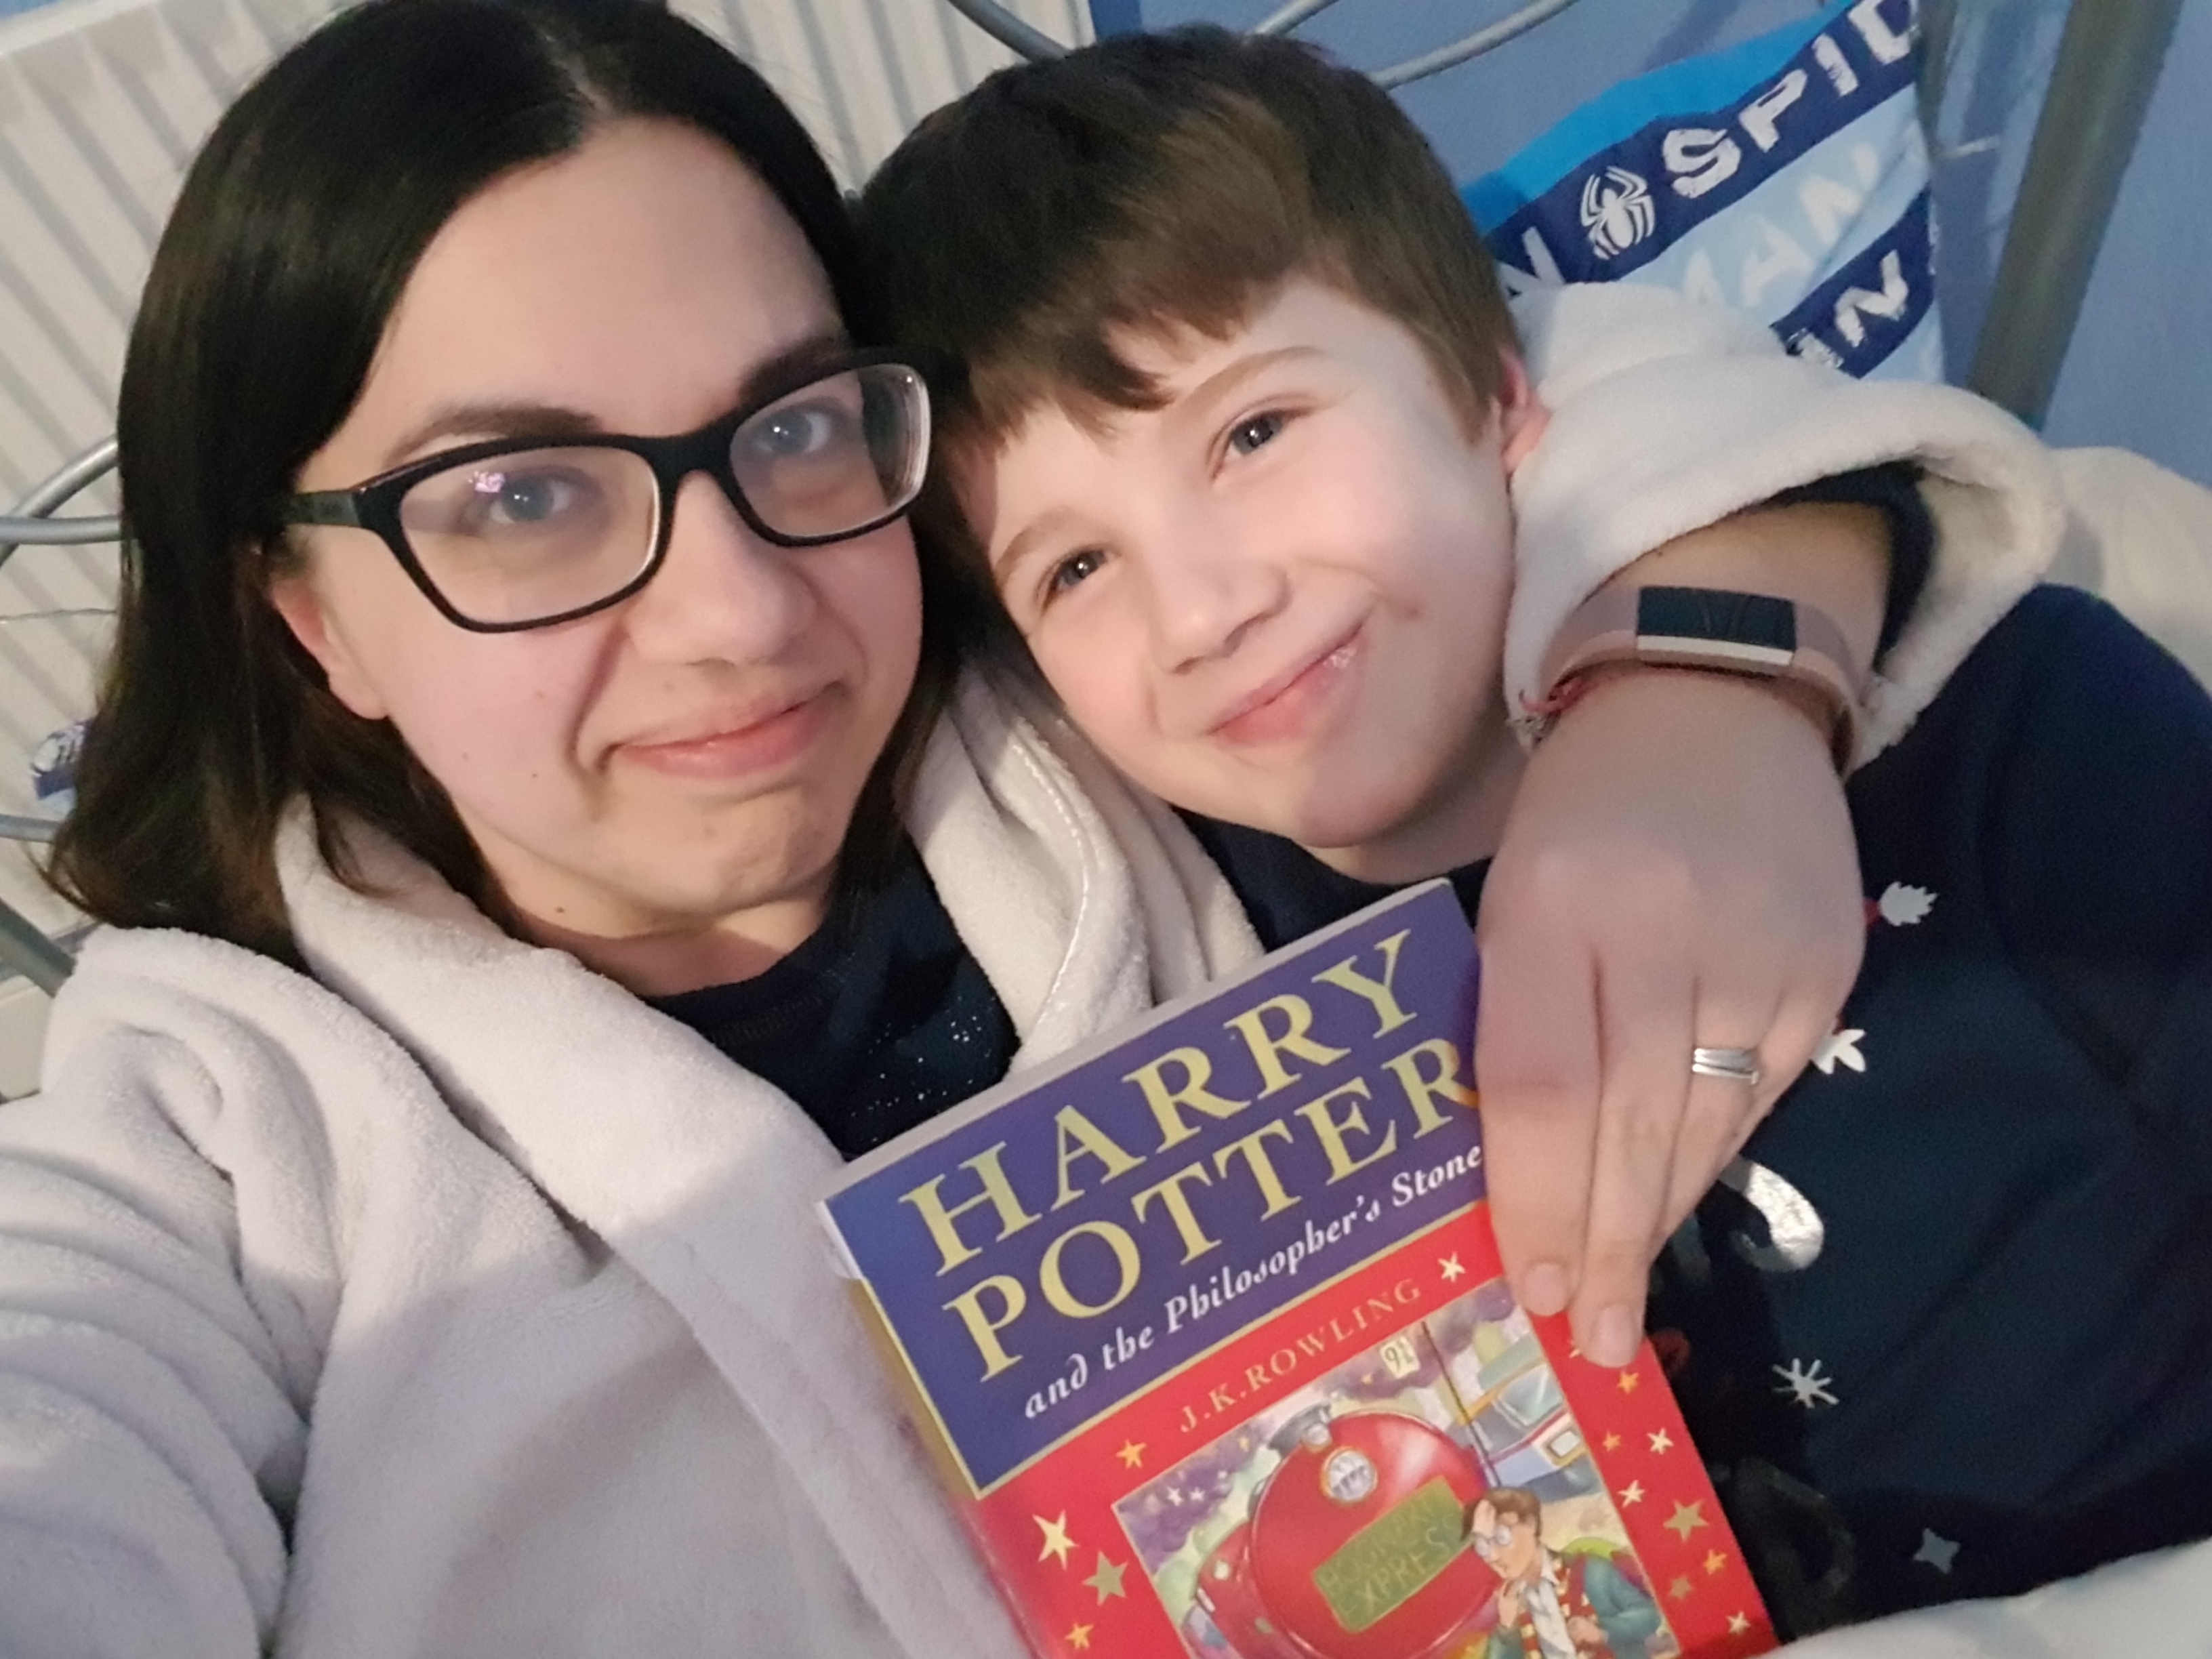 Mummy and Jacob with Harry Potter